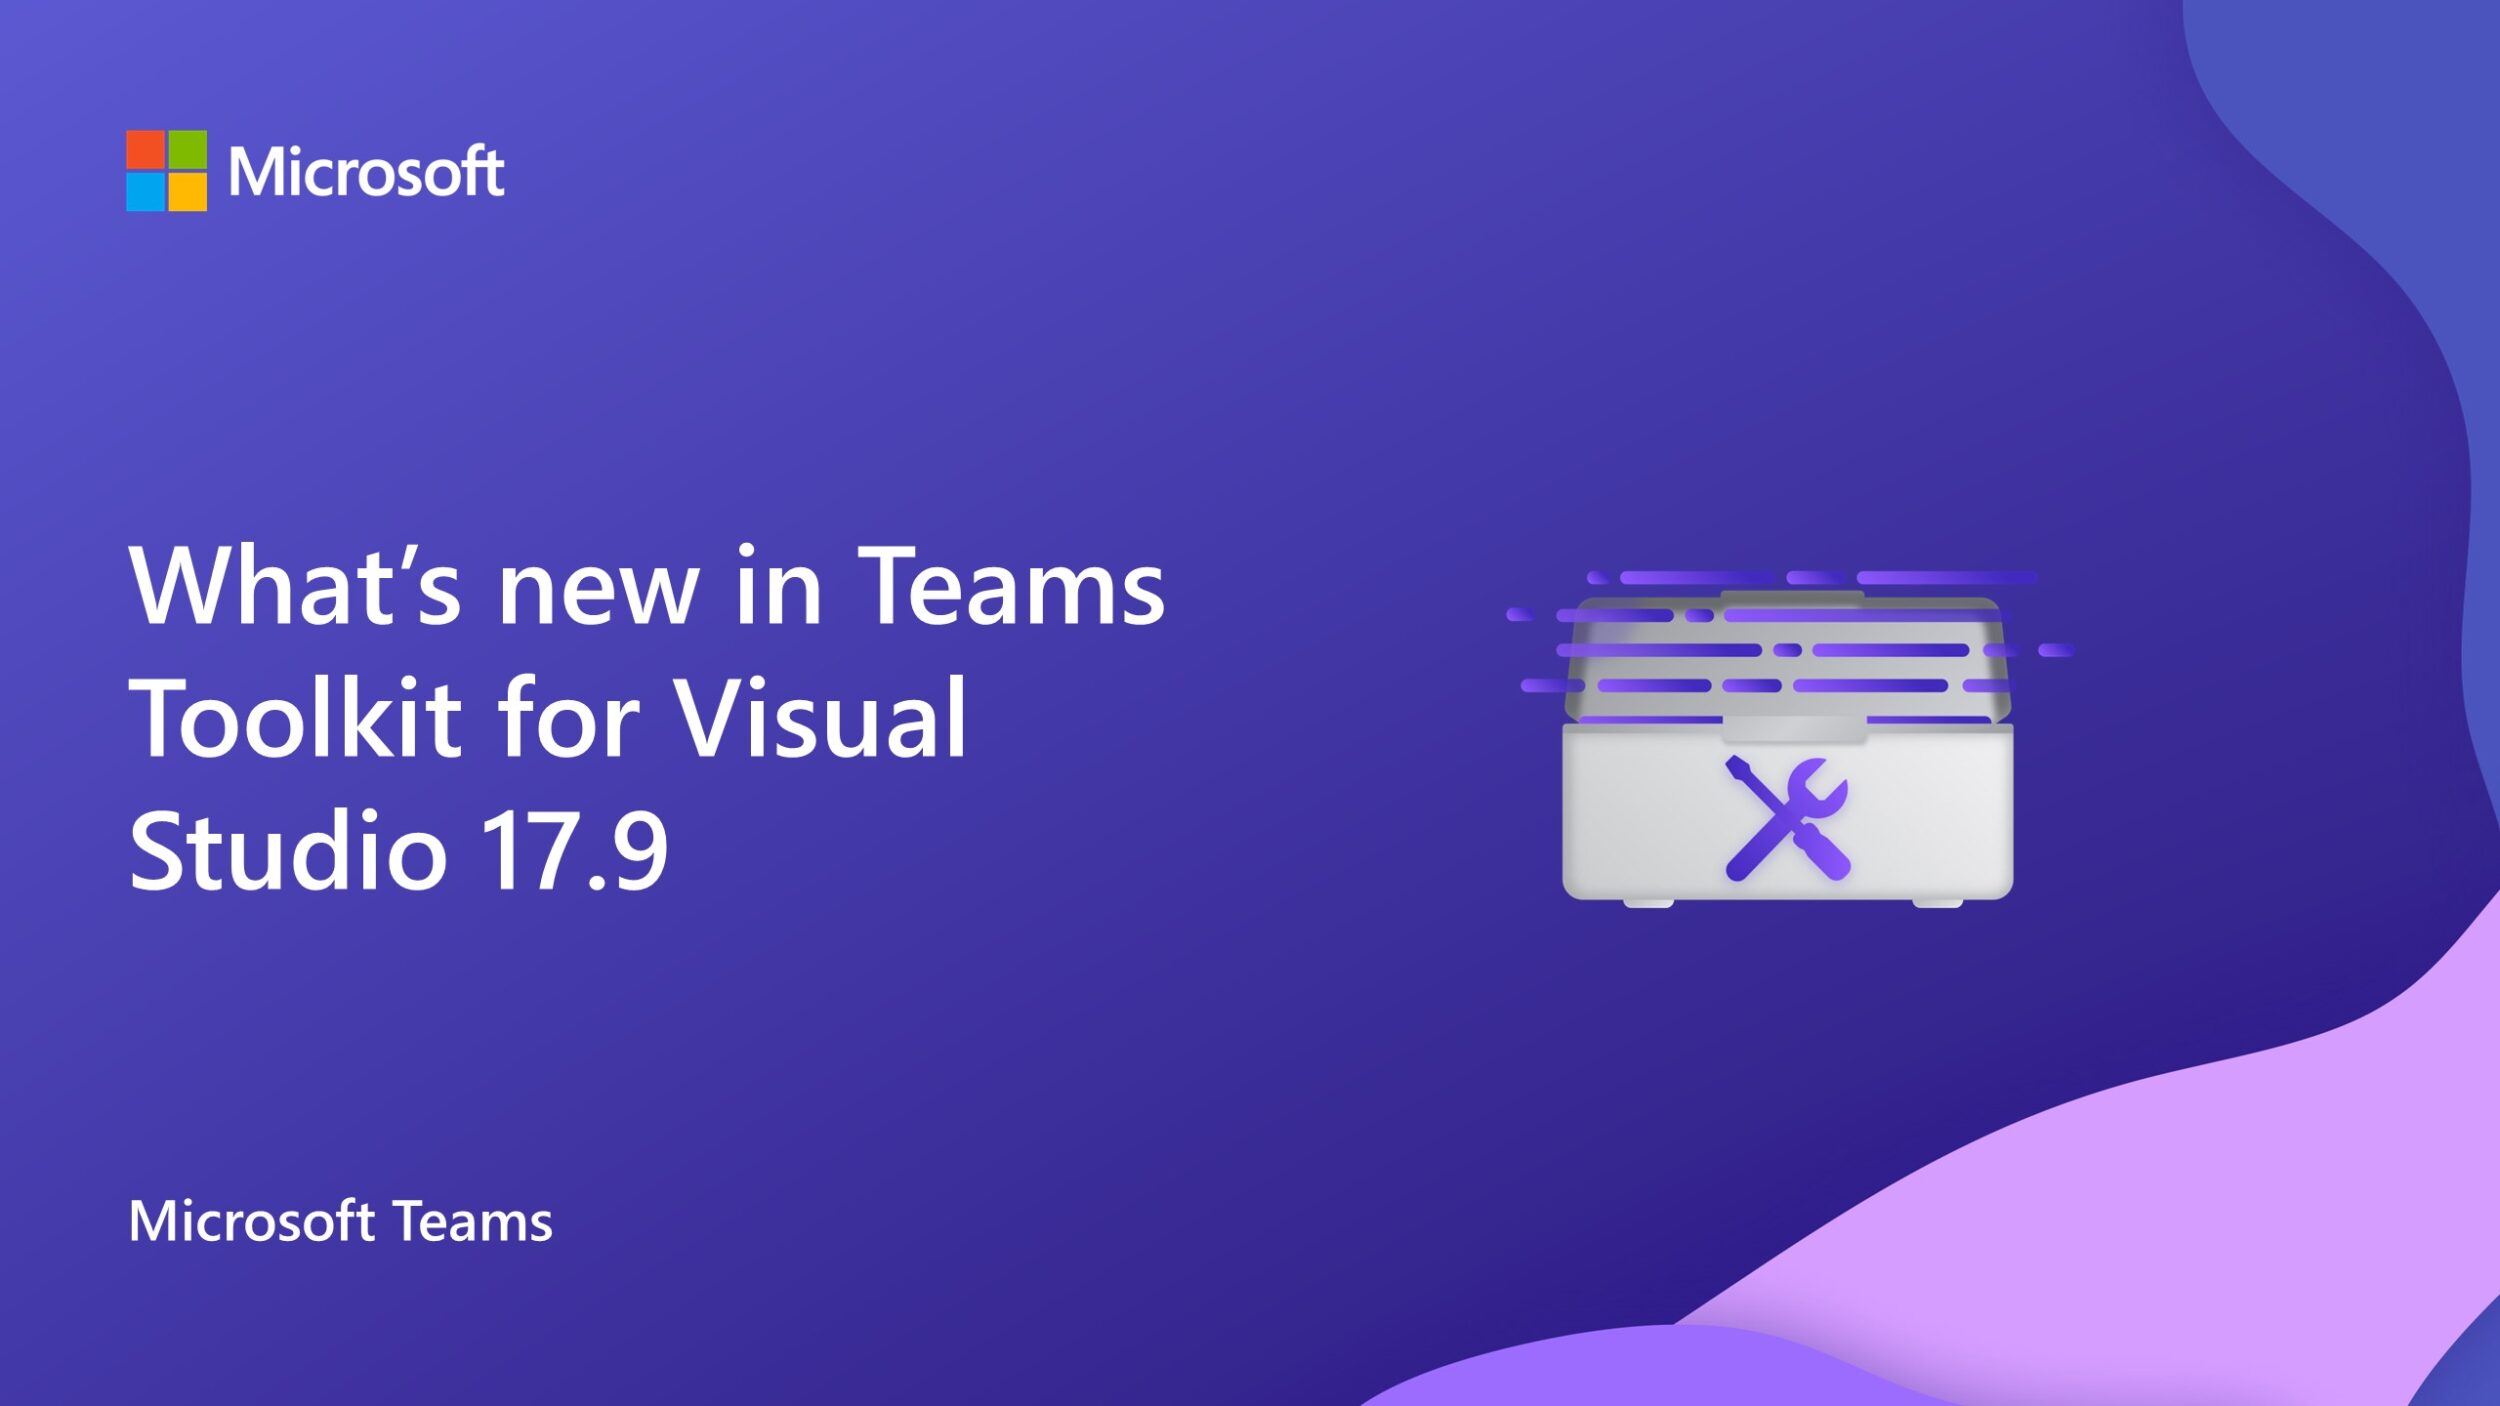 What’s new in Teams Toolkit for Visual Studio 17.9